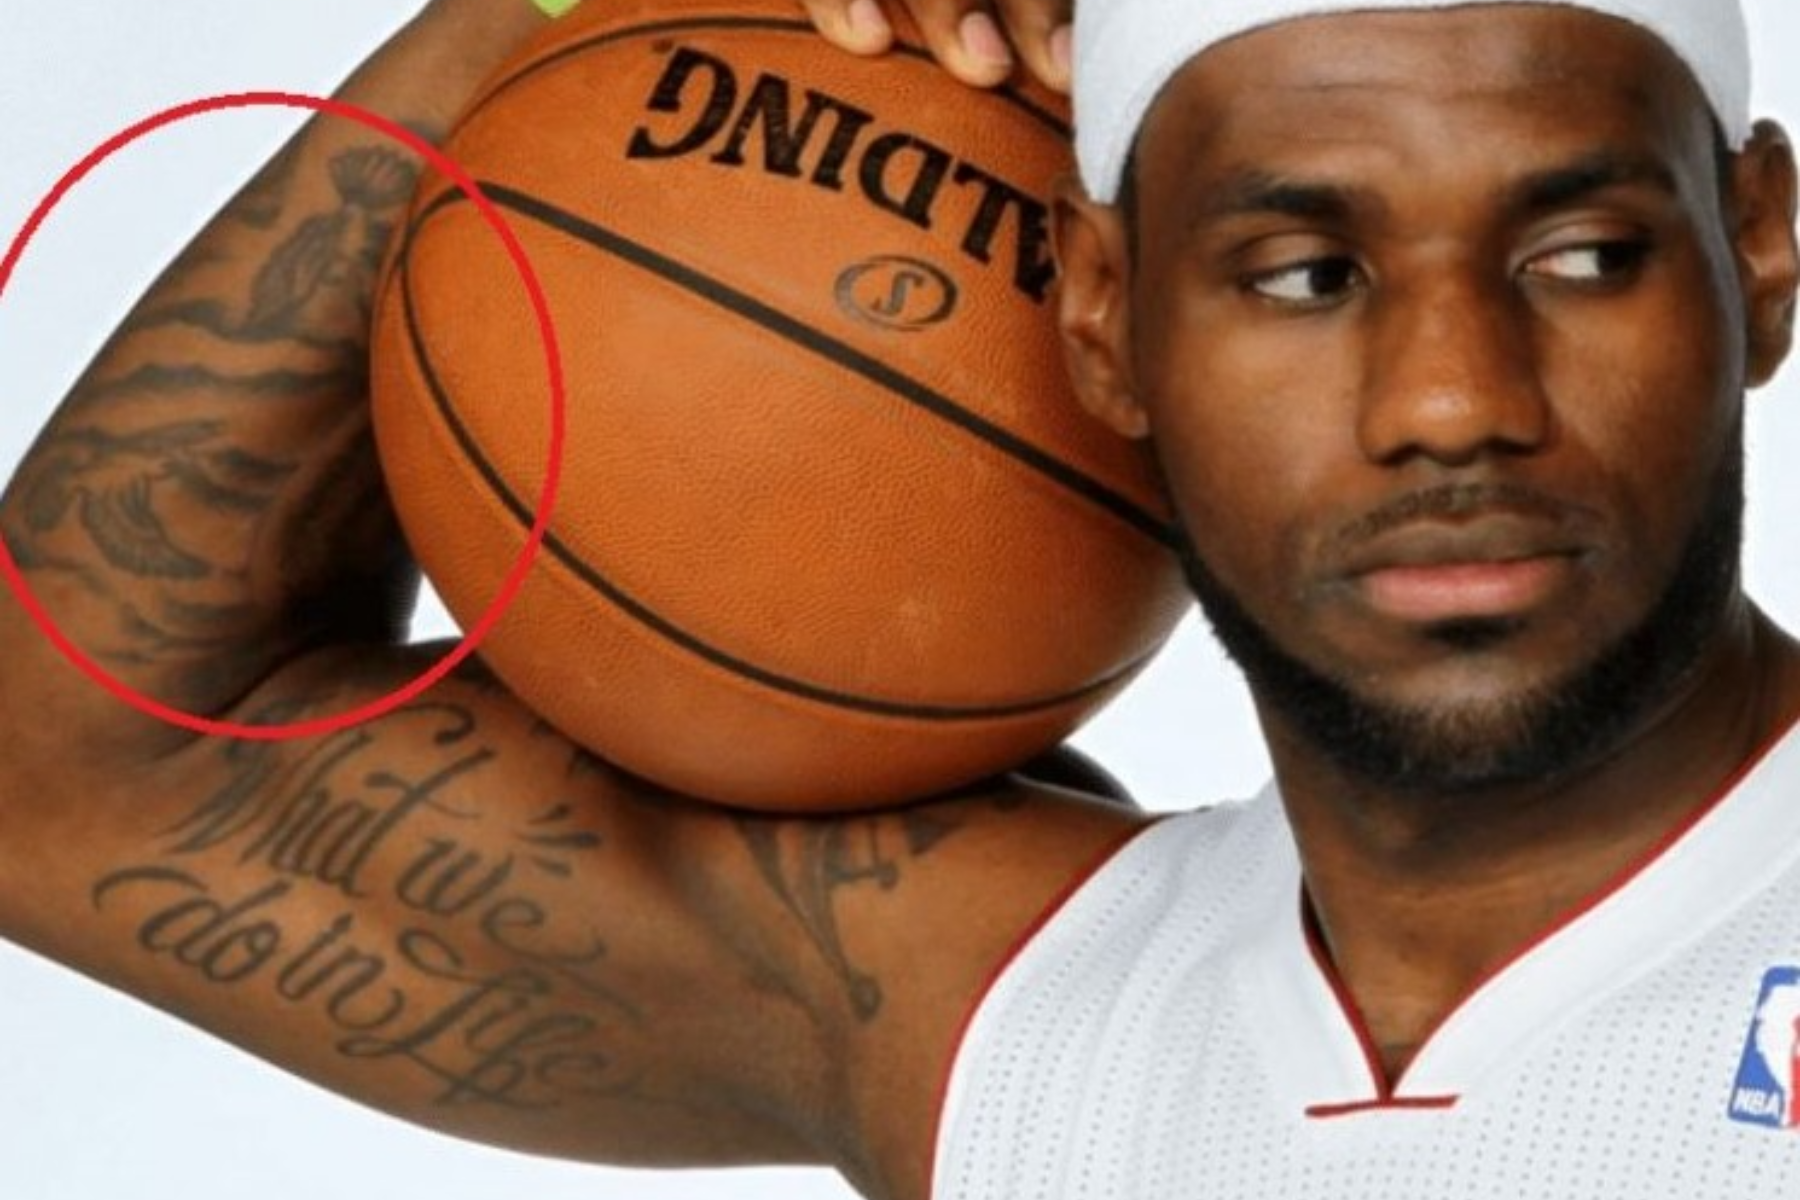 LeBron James has birds tattoo on his inner right arm